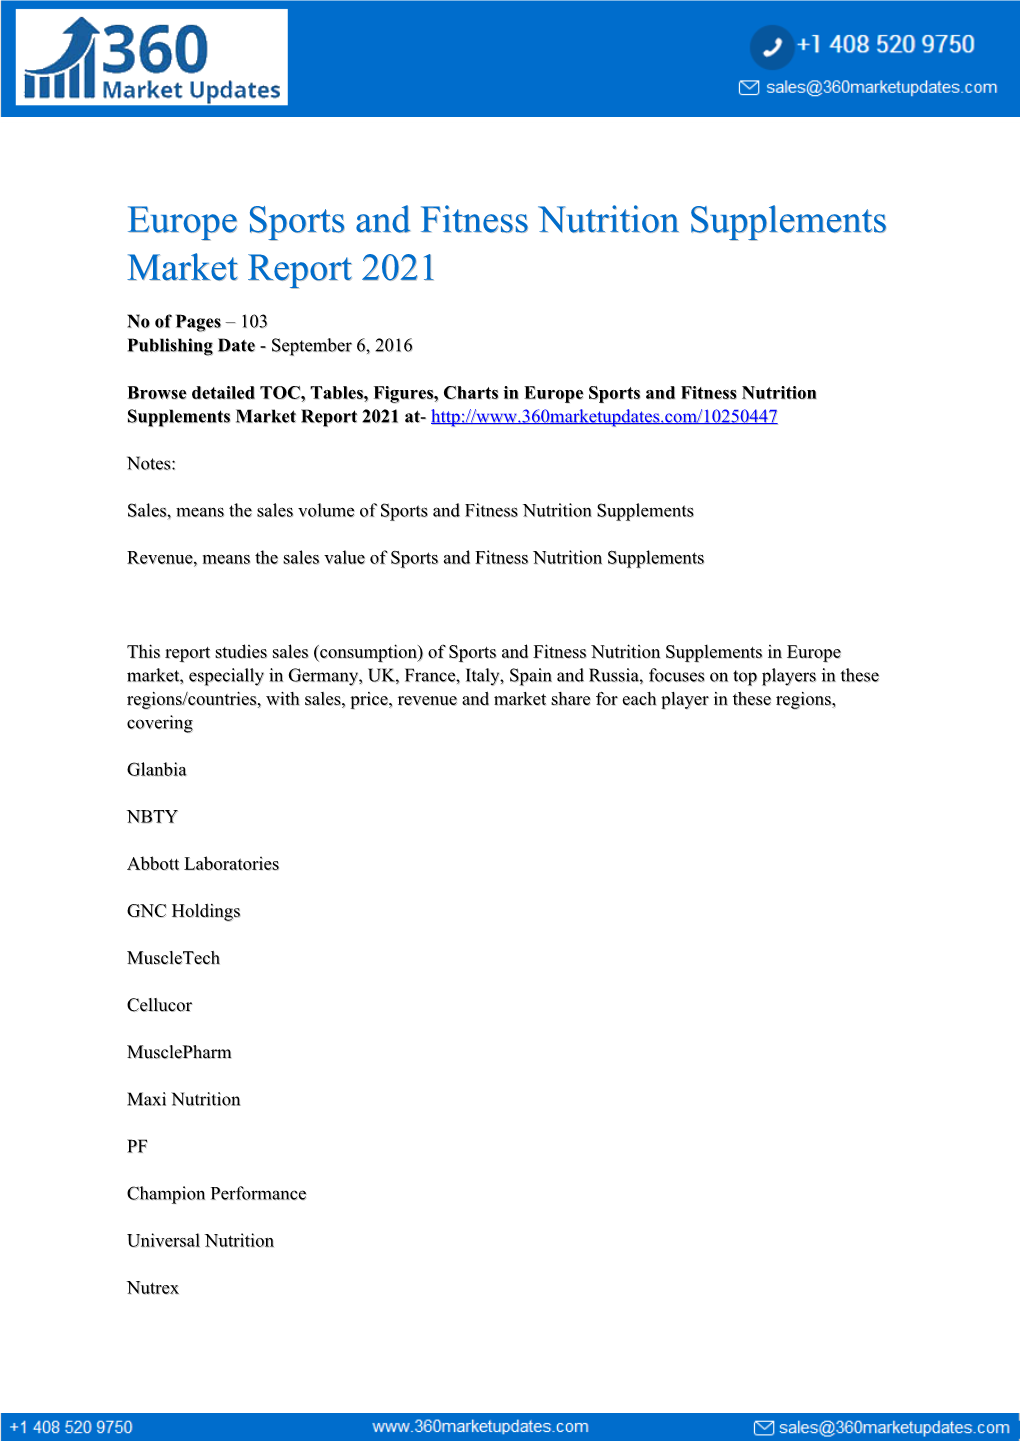 Europe Sports and Fitness Nutrition Supplements Market Report 2021